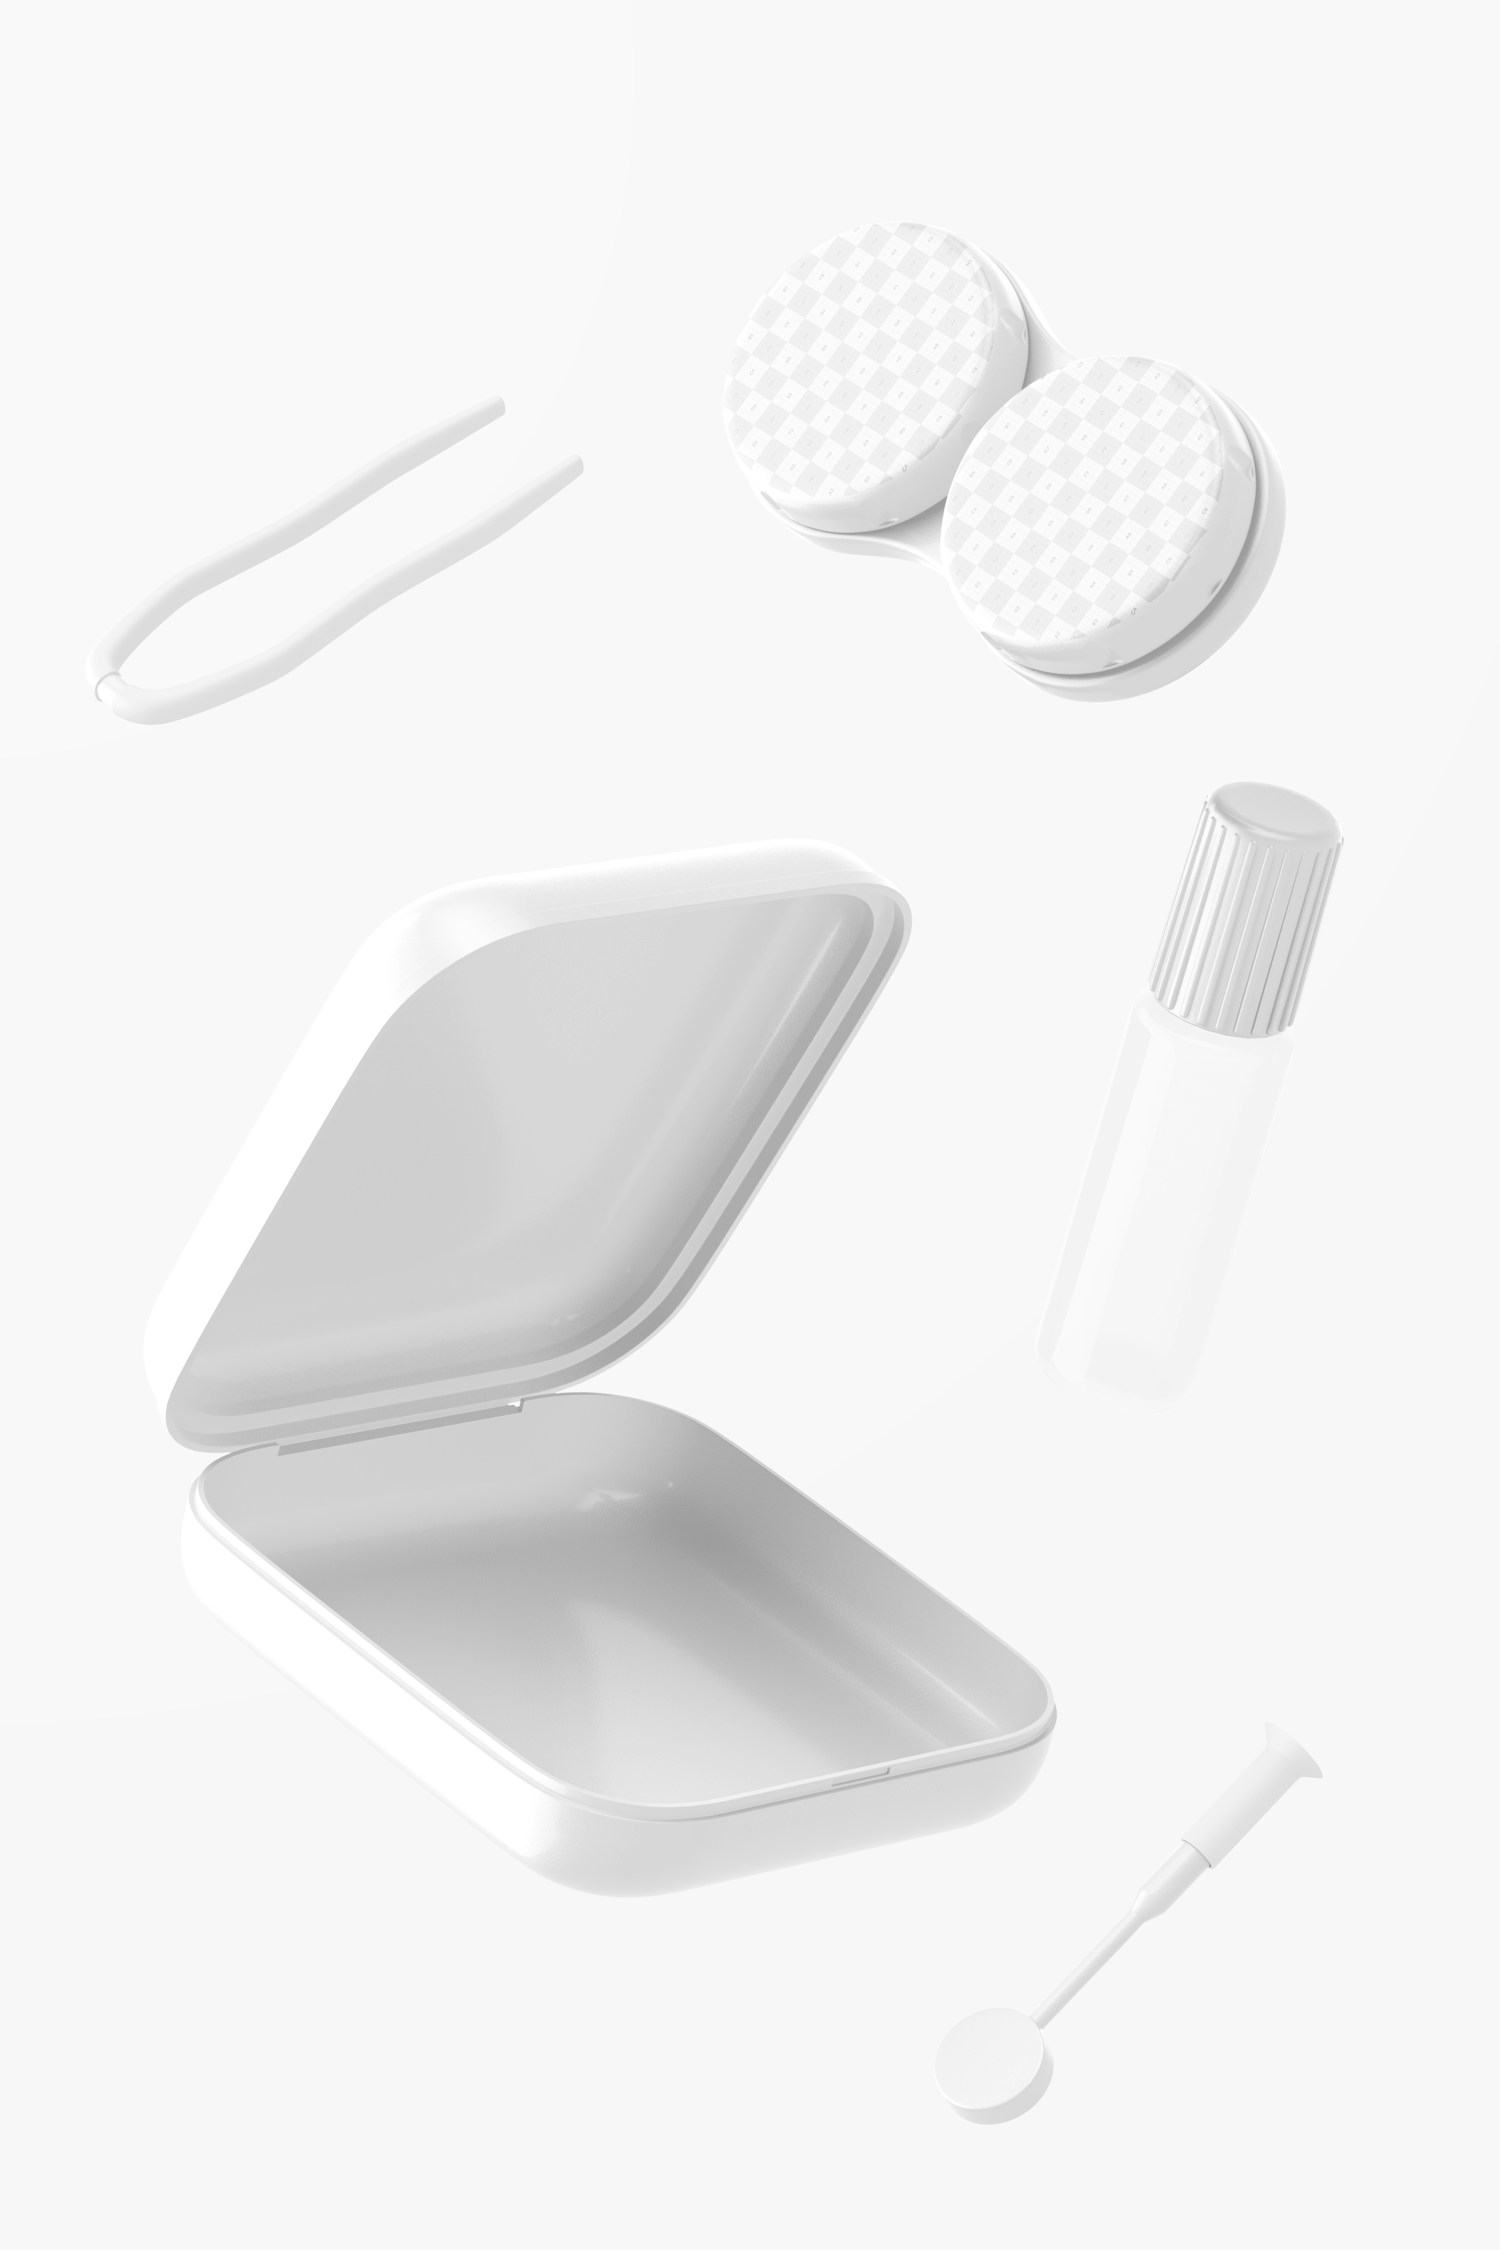 Contact Lenses Case Mockup, Floating